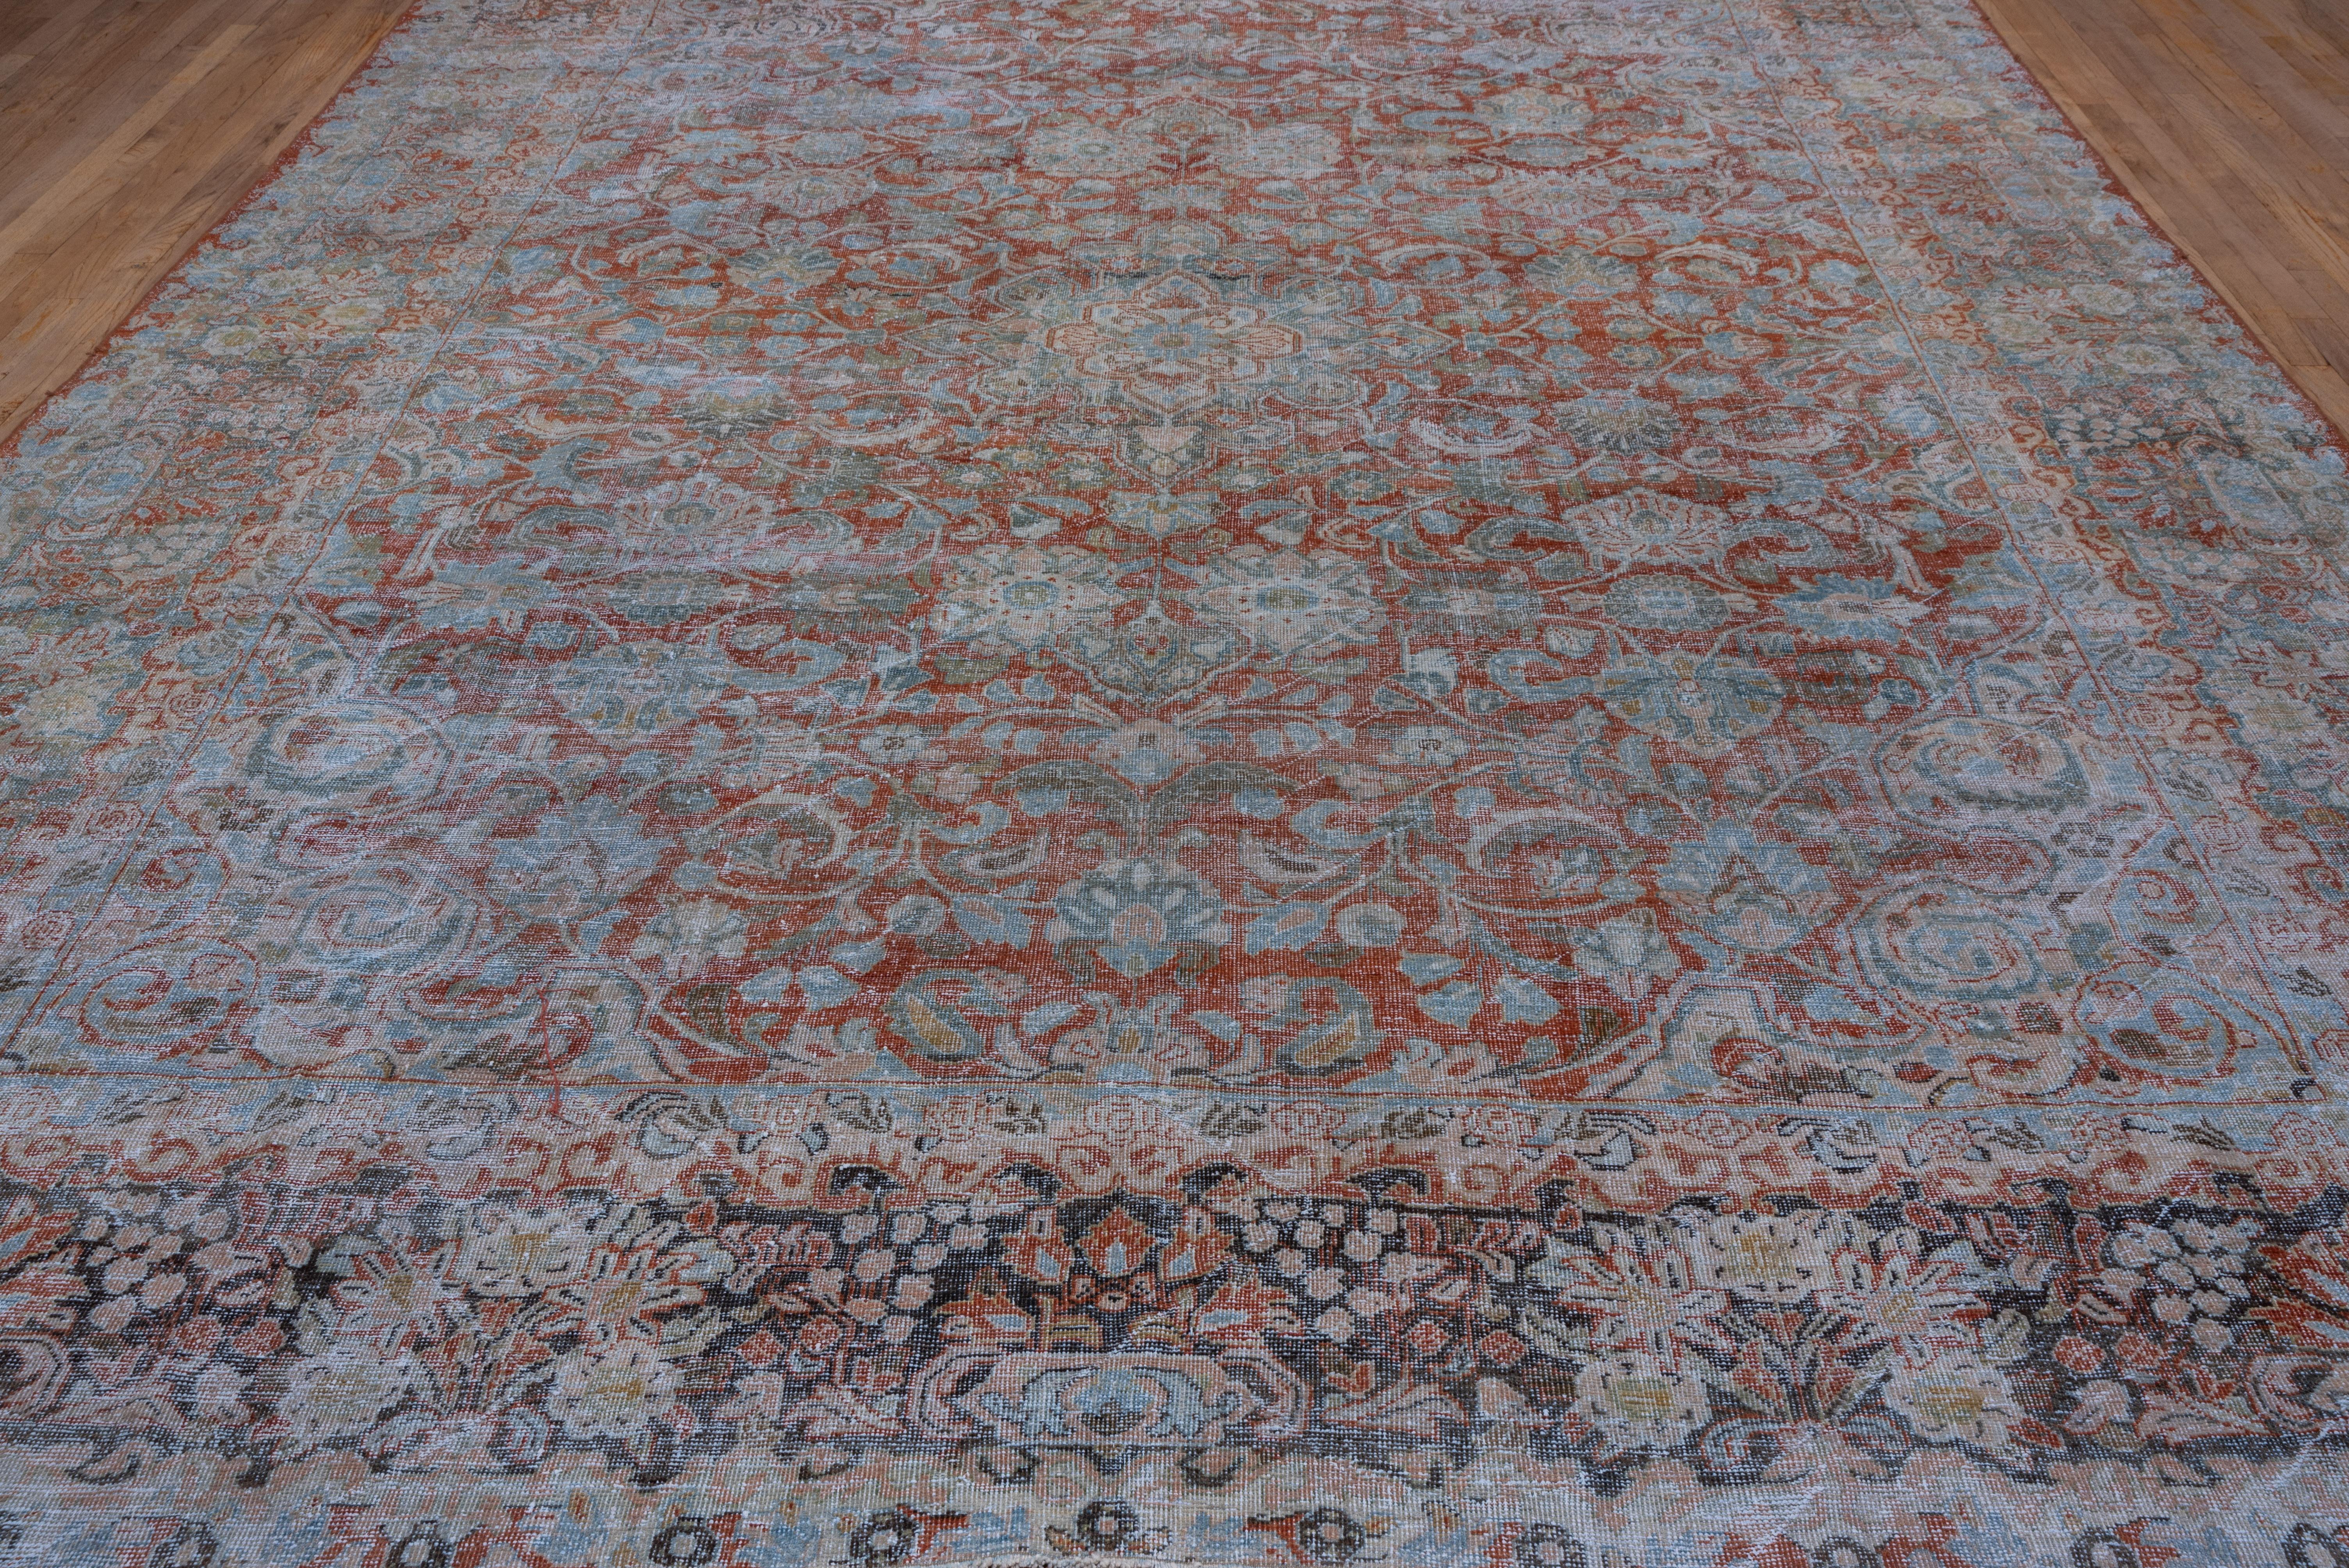 Rustic Antique Distressed Red Persian Mahal Carpet, All-Over Field, Blue Accents For Sale